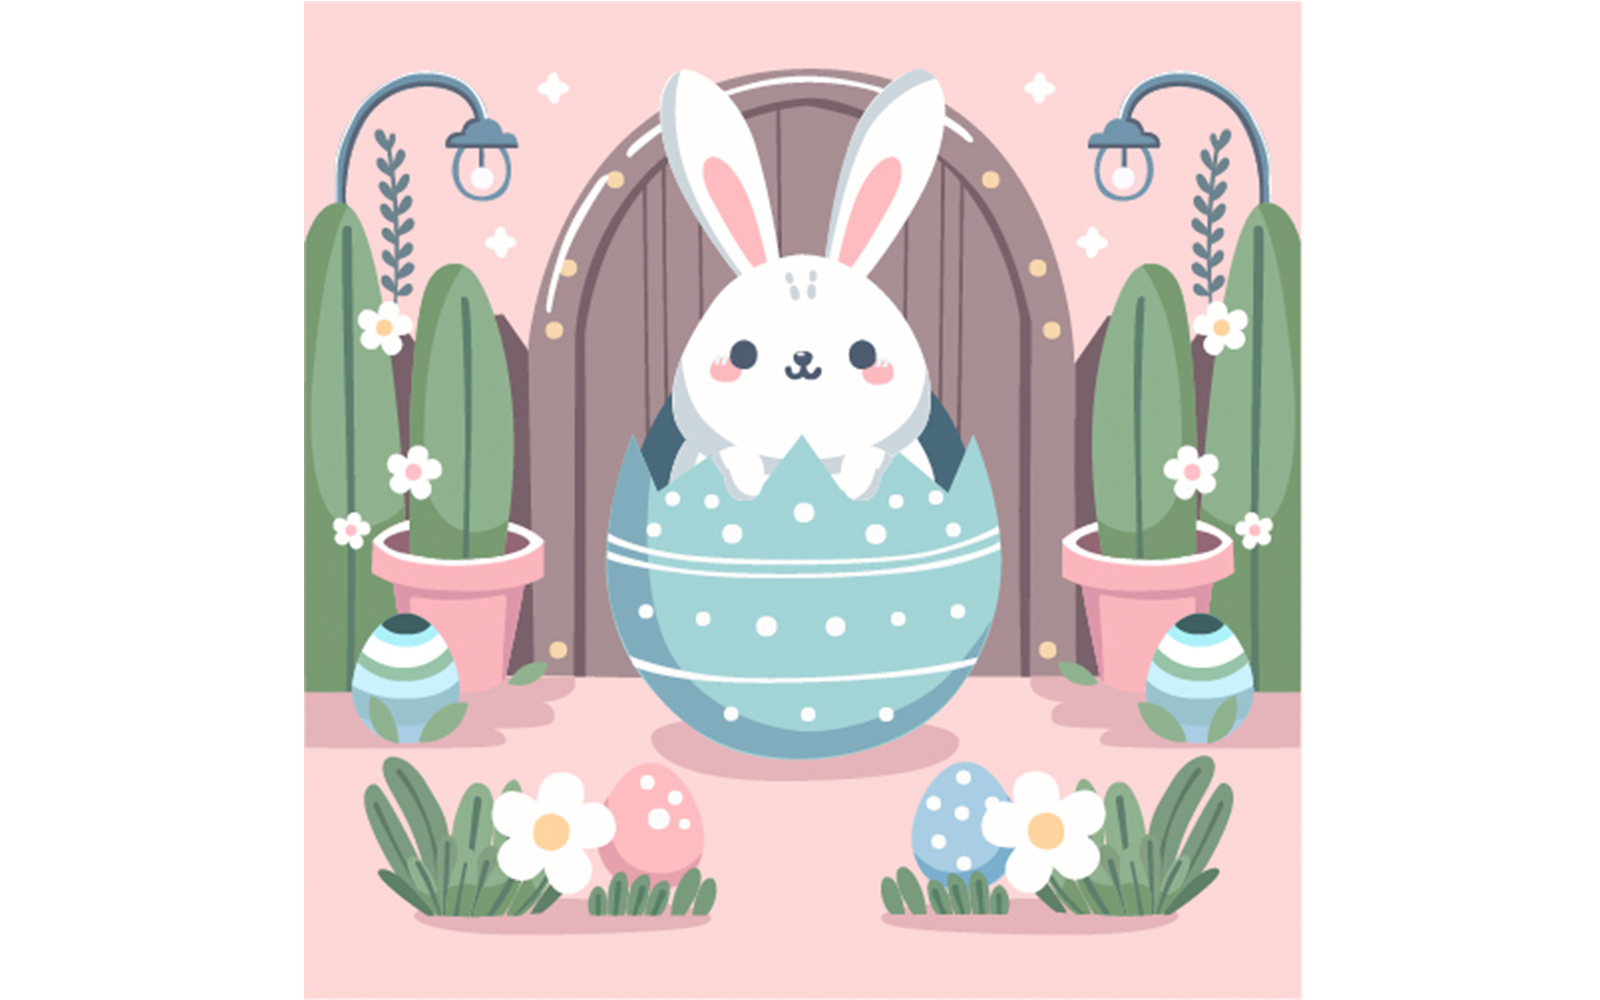 Hand Drawn Cute Easter Illustration